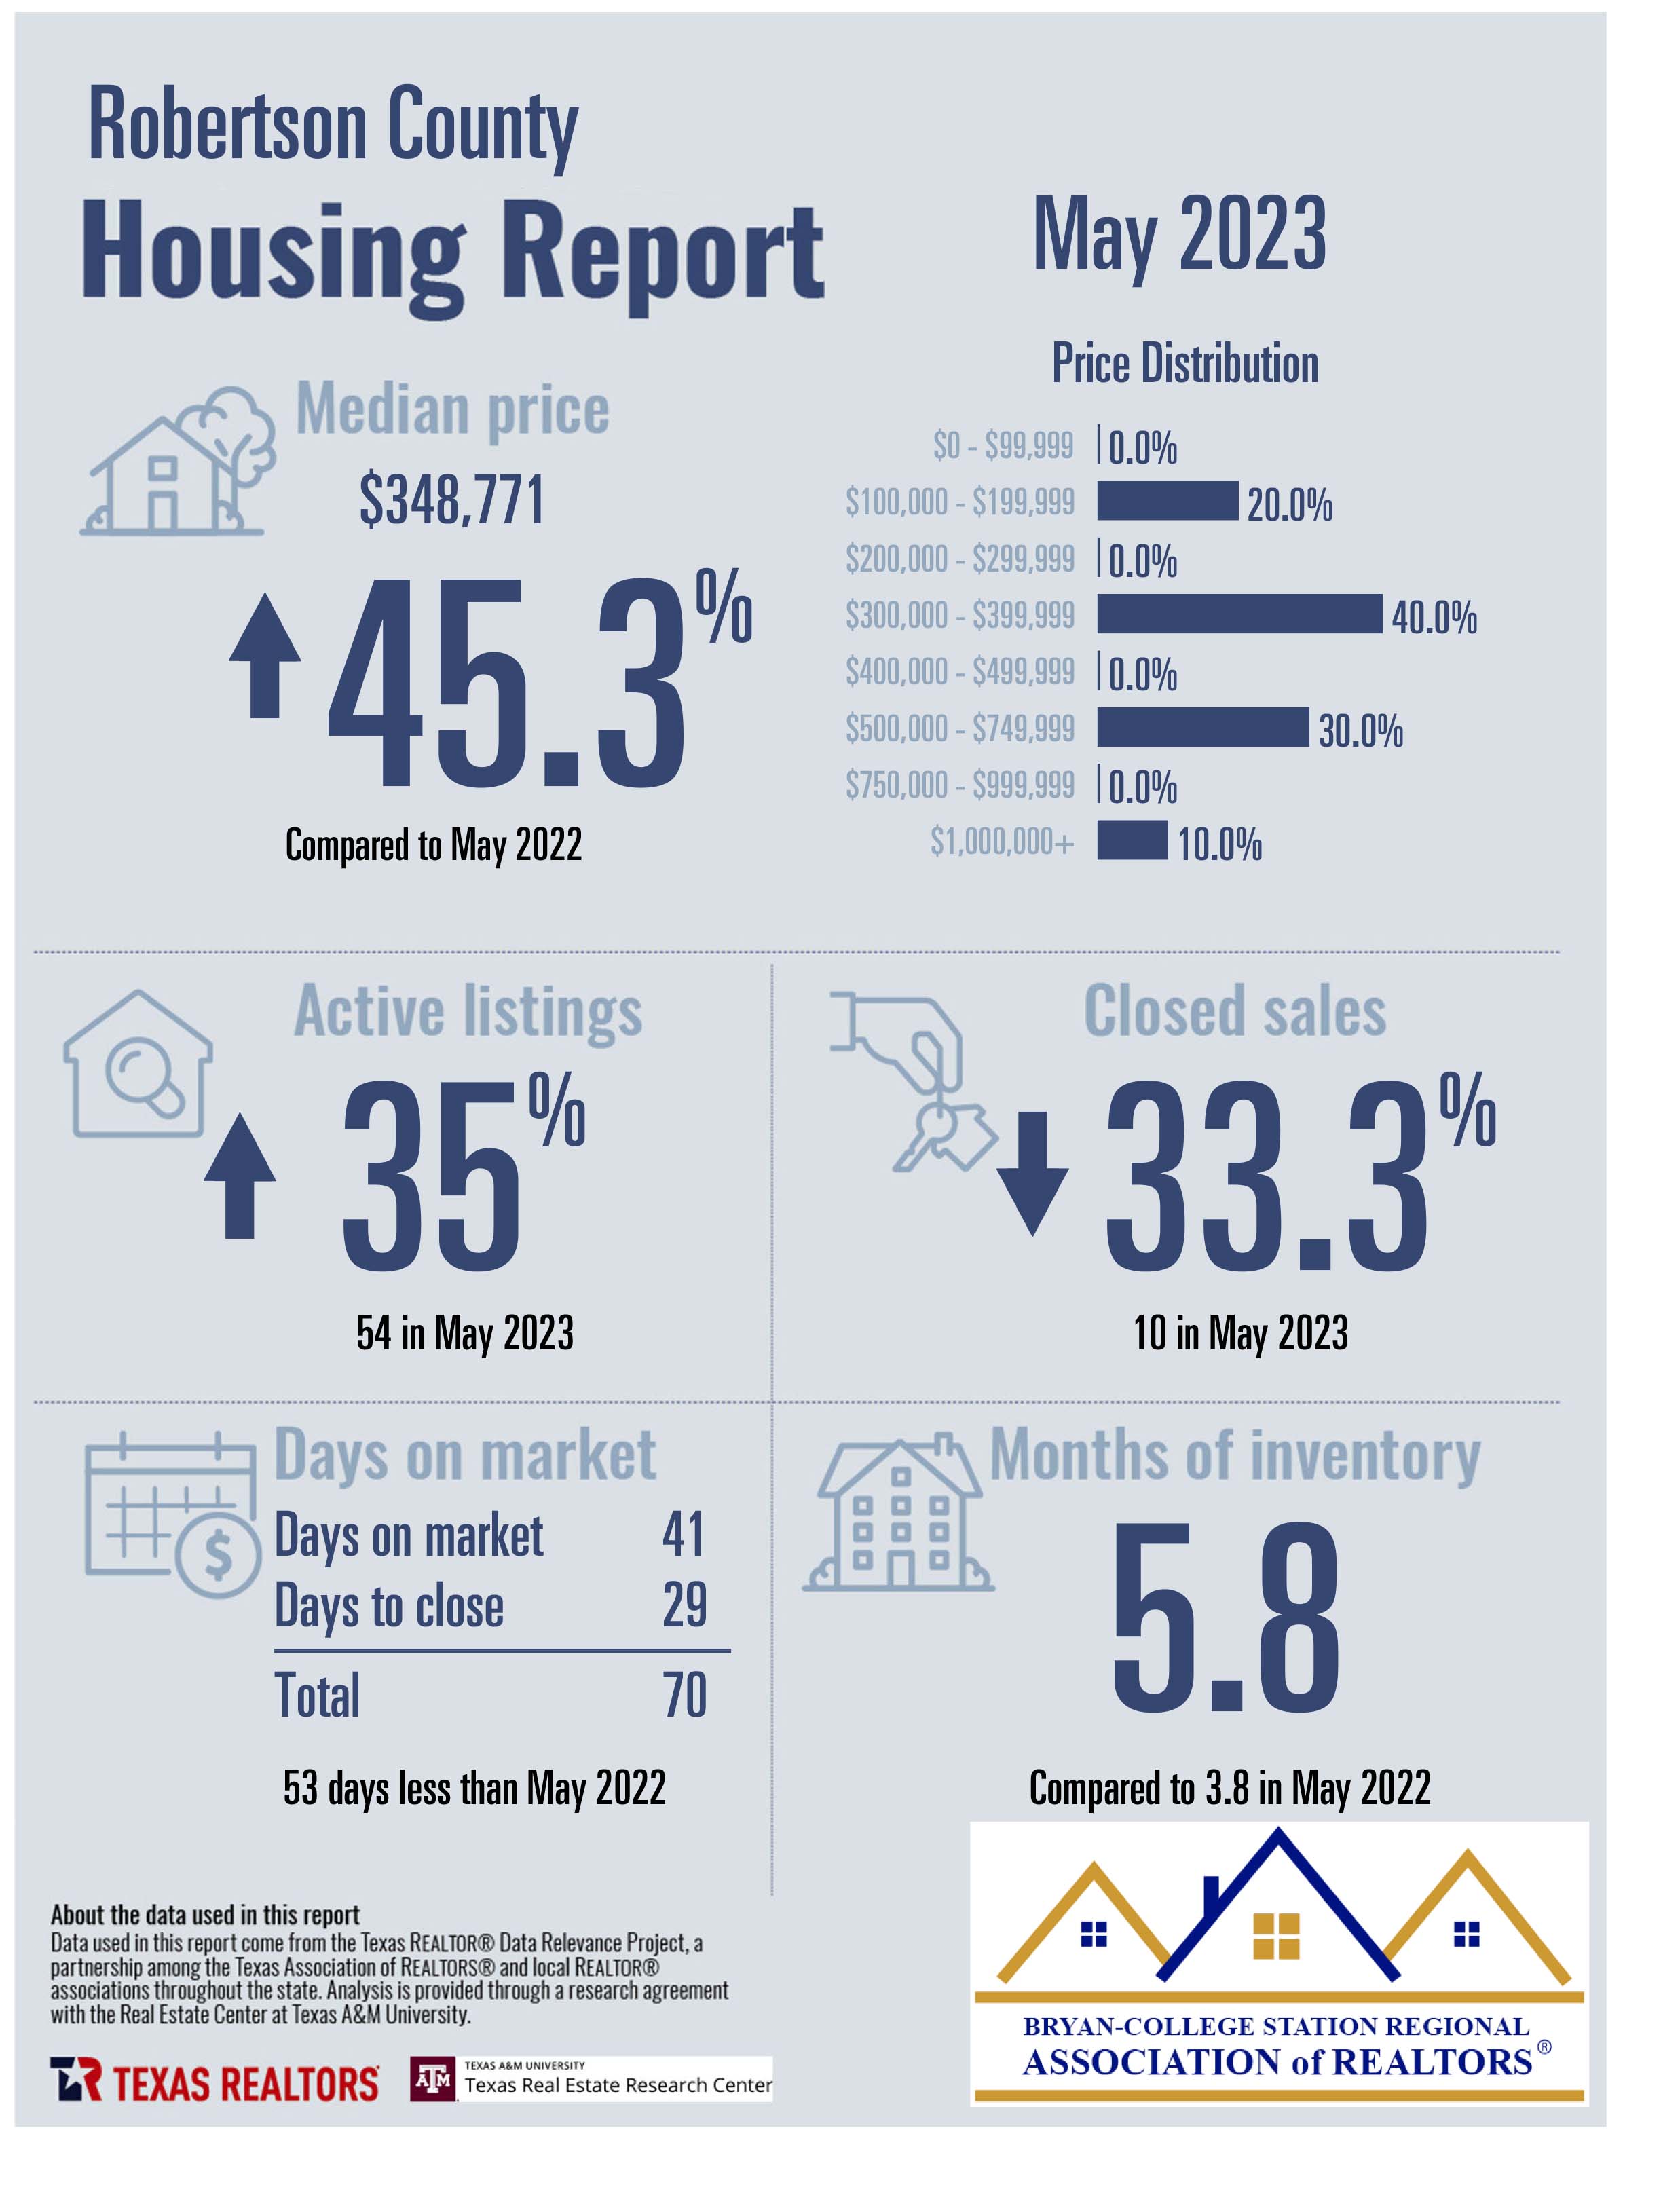 Residential Home Sale Report may 2023 - Robertson